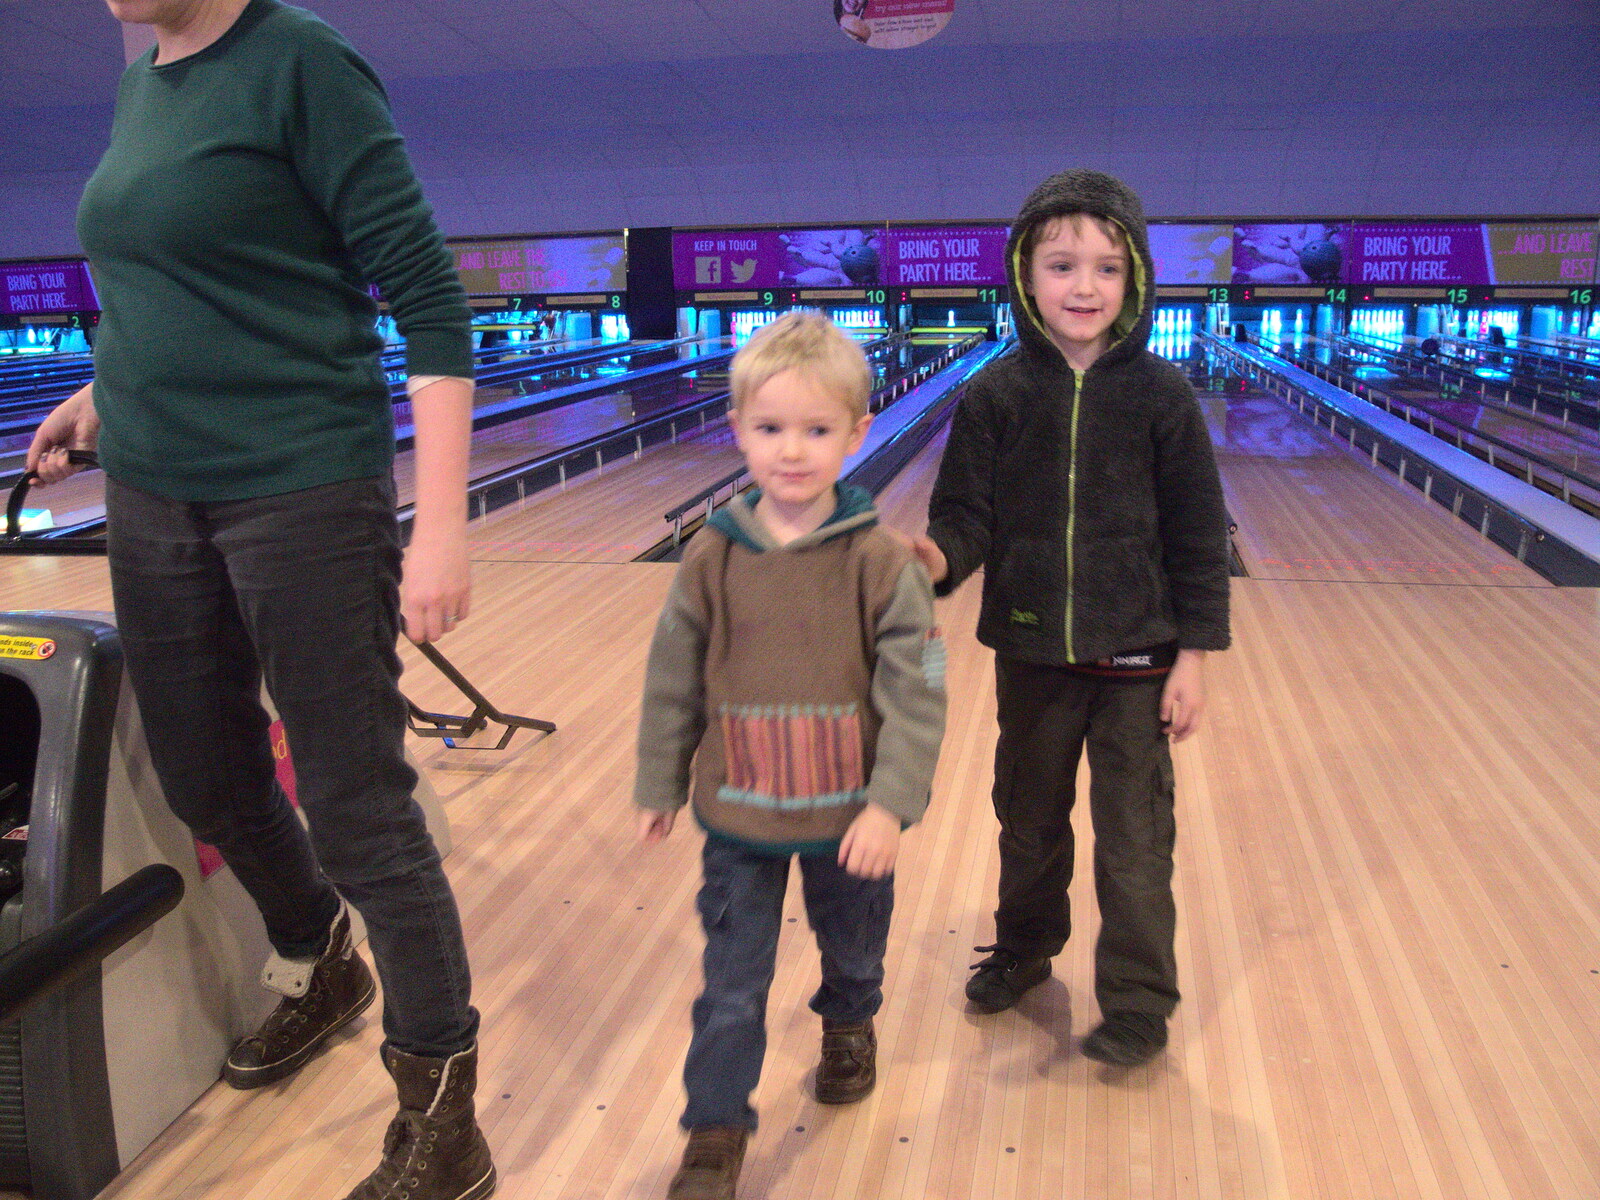 Harry and Fred from Ten-Pin Bowling, Riverside, Norwich - 3rd January 2016